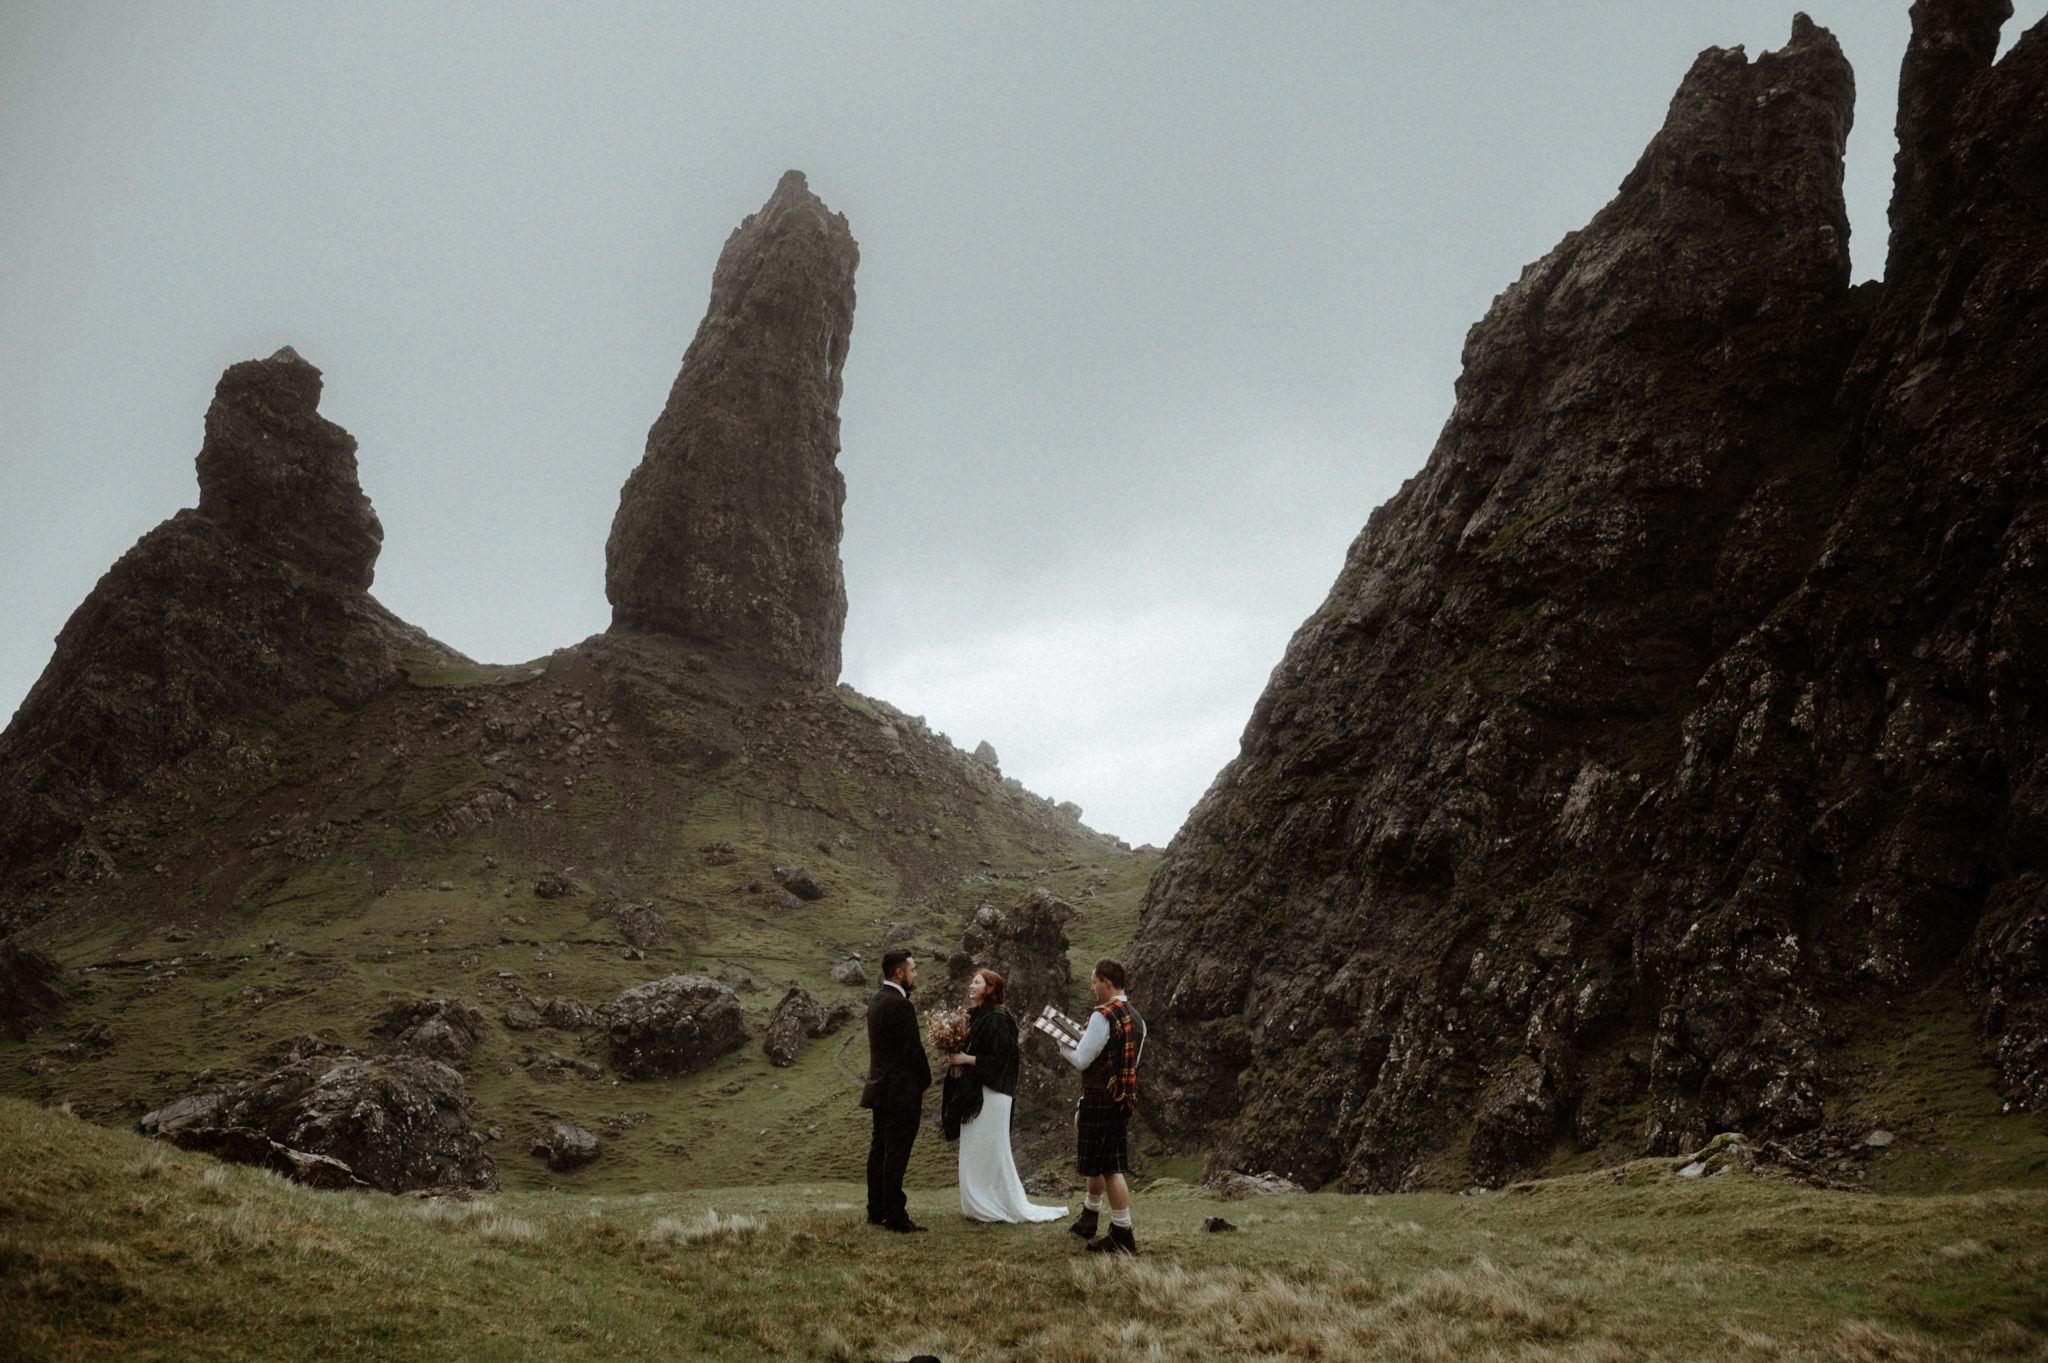 elopement ceremony taking place in scotland next to the old man of Storr on Skye